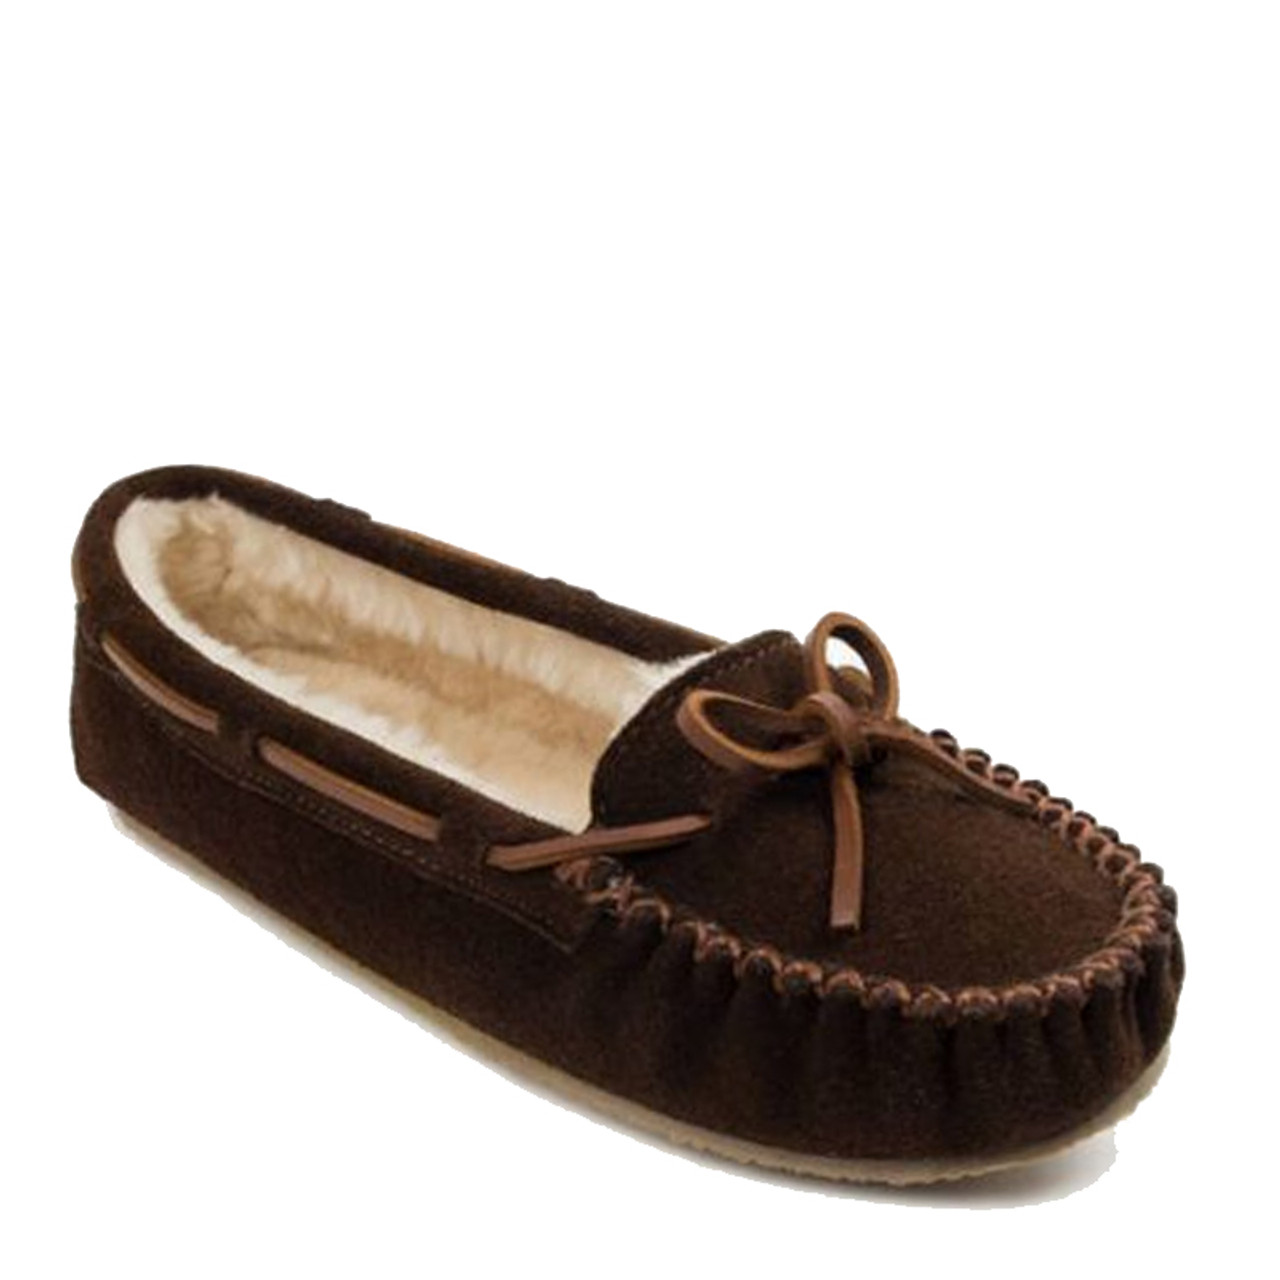 SLIPPERS, MOCCASIN, BROWN, UL